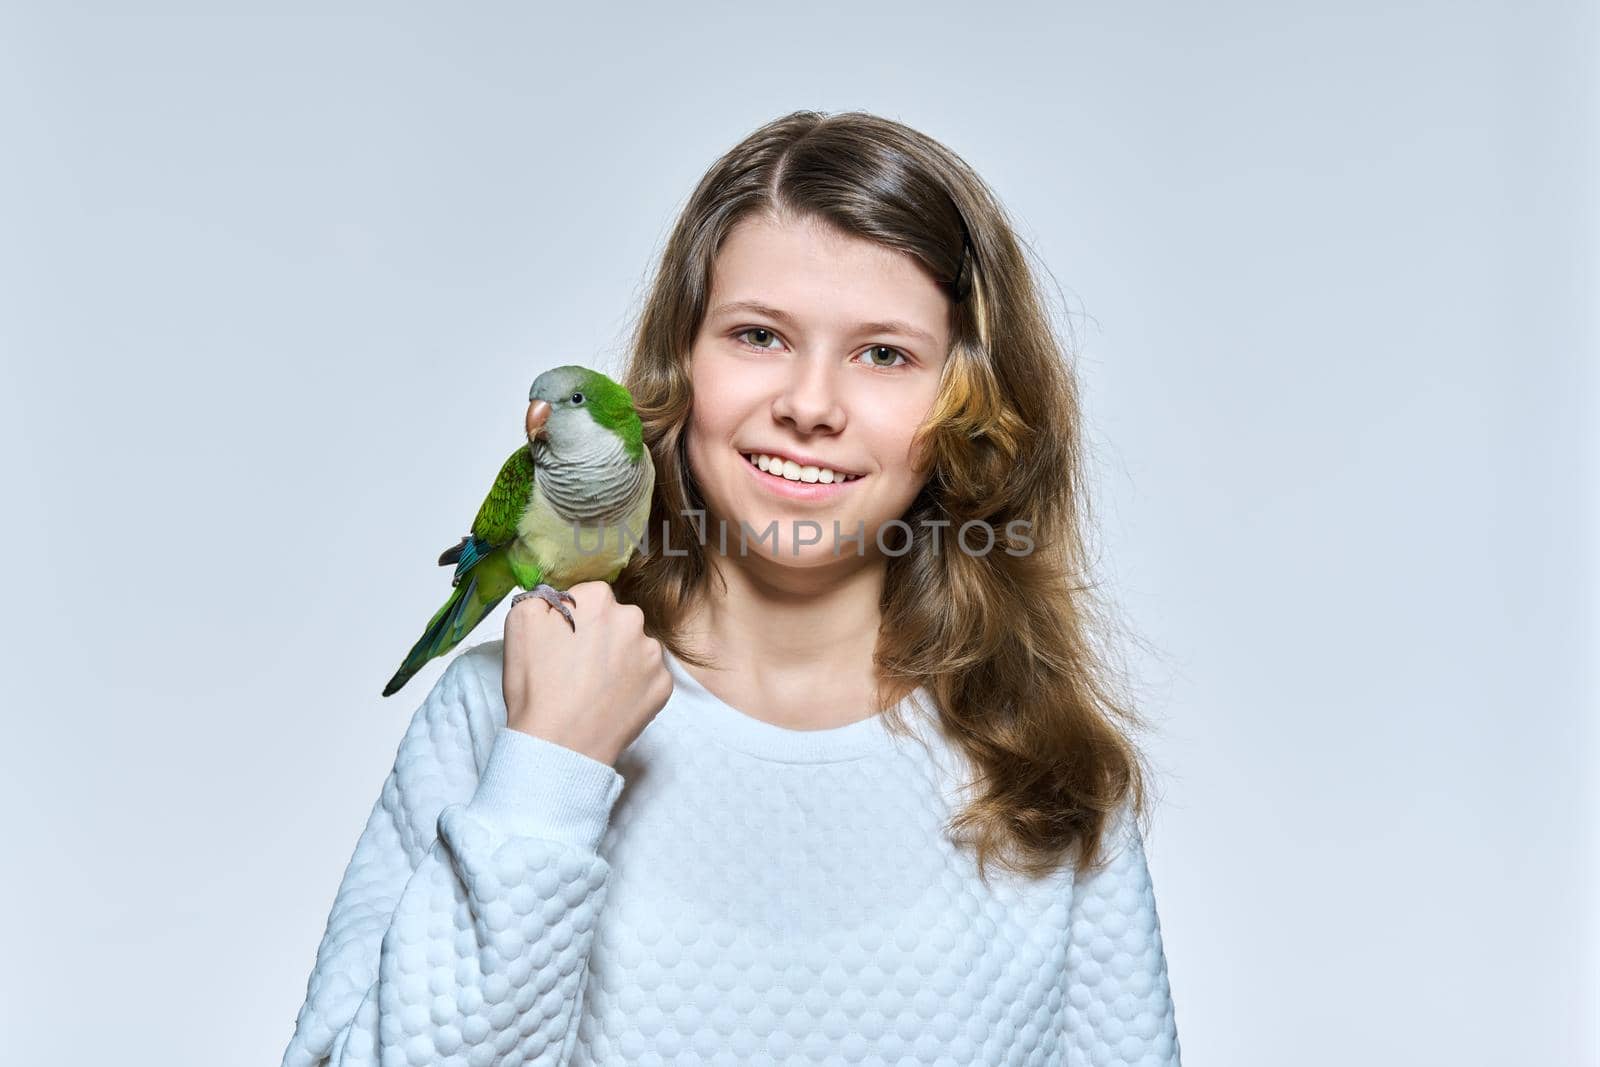 Child girl with pet green quaker parrot looking at camera on light studio background by VH-studio